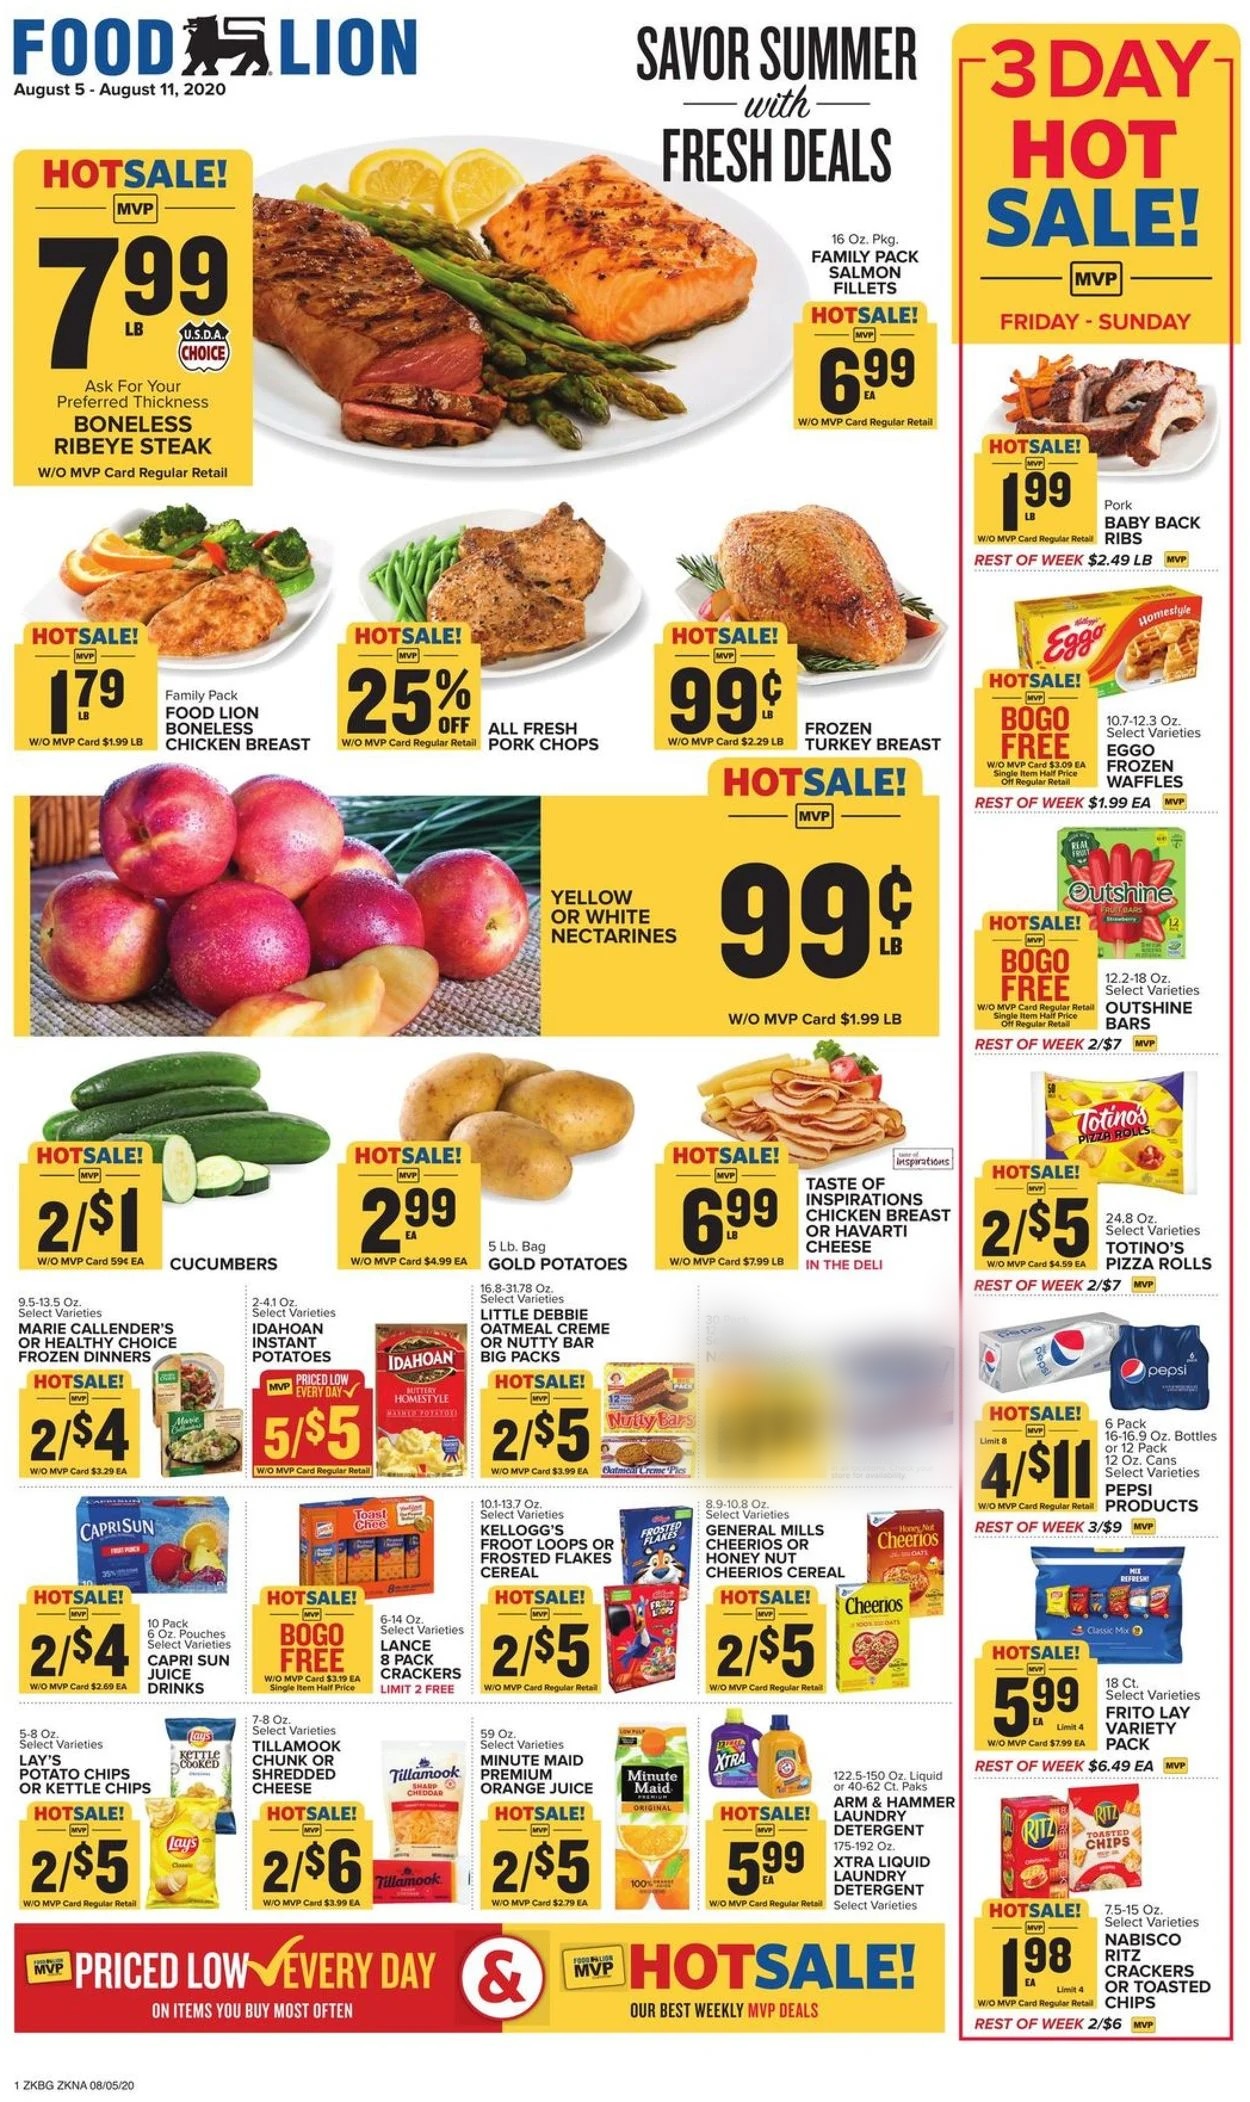 Food Lion Current weekly ad 08/05 - 08/11/2020 - frequent-ads.com